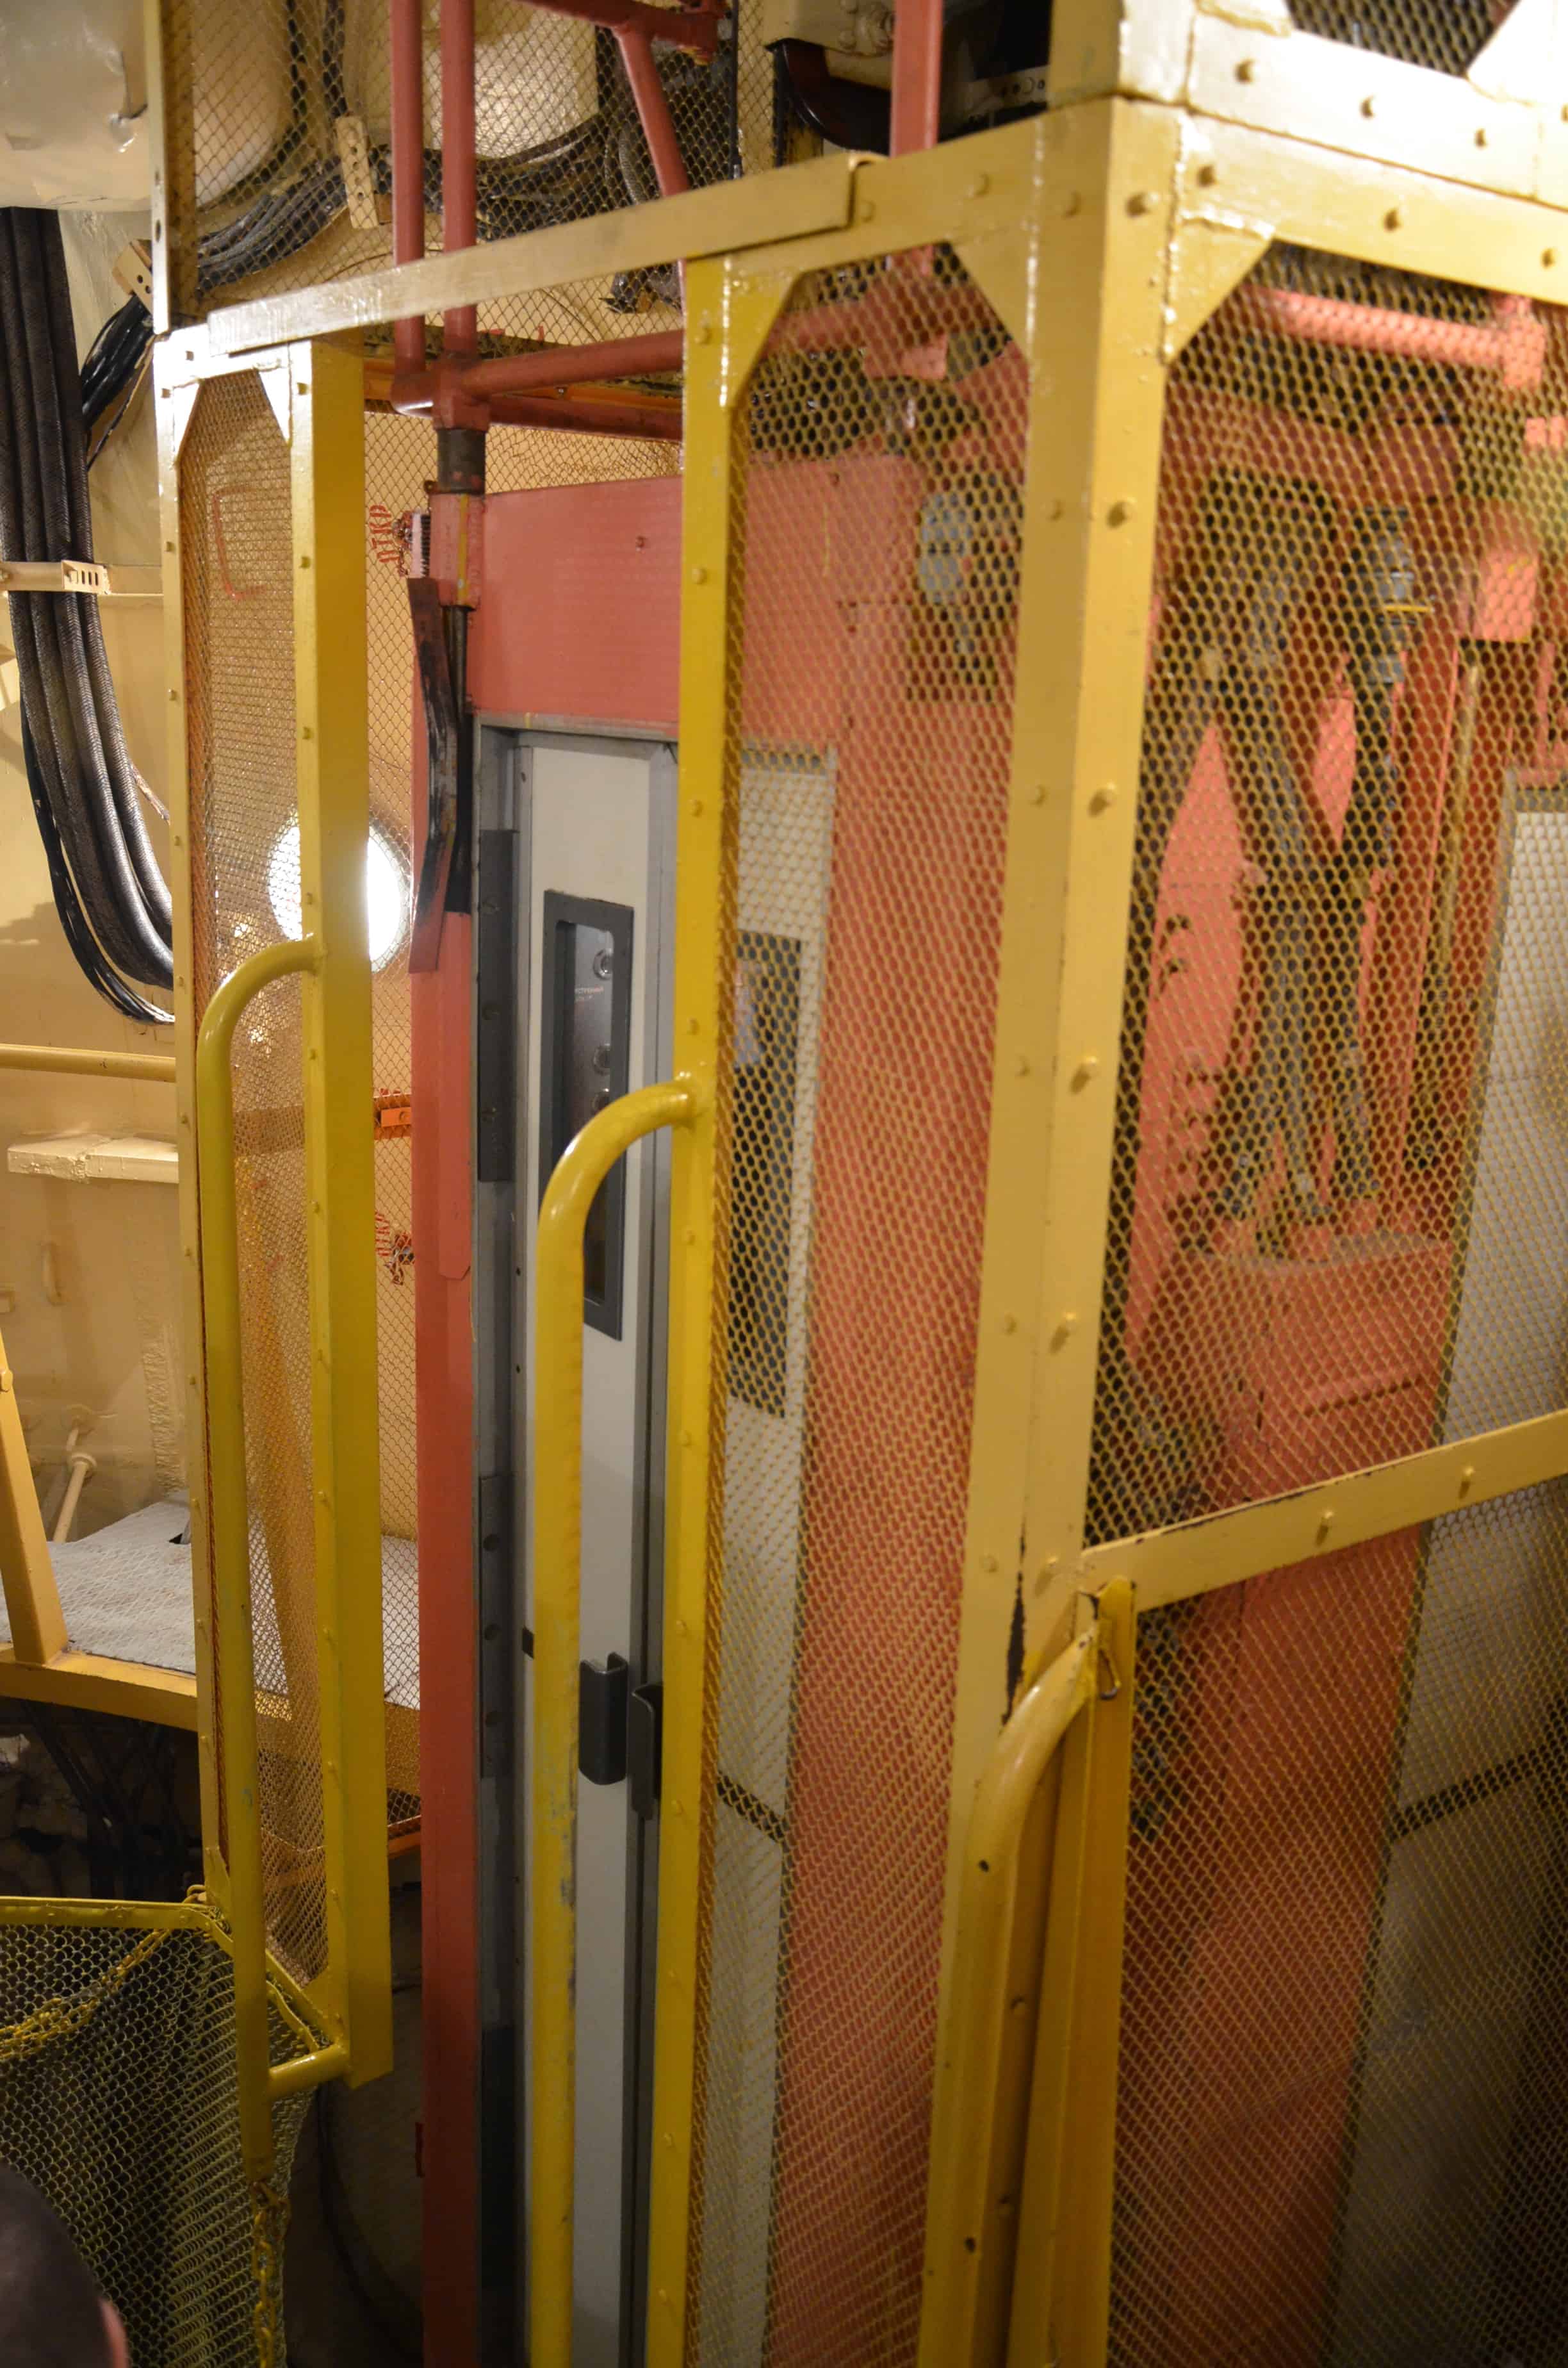 Elevator in the Unified Command Post at Strategic Missile Forces Museum near Pobuzke, Ukraine